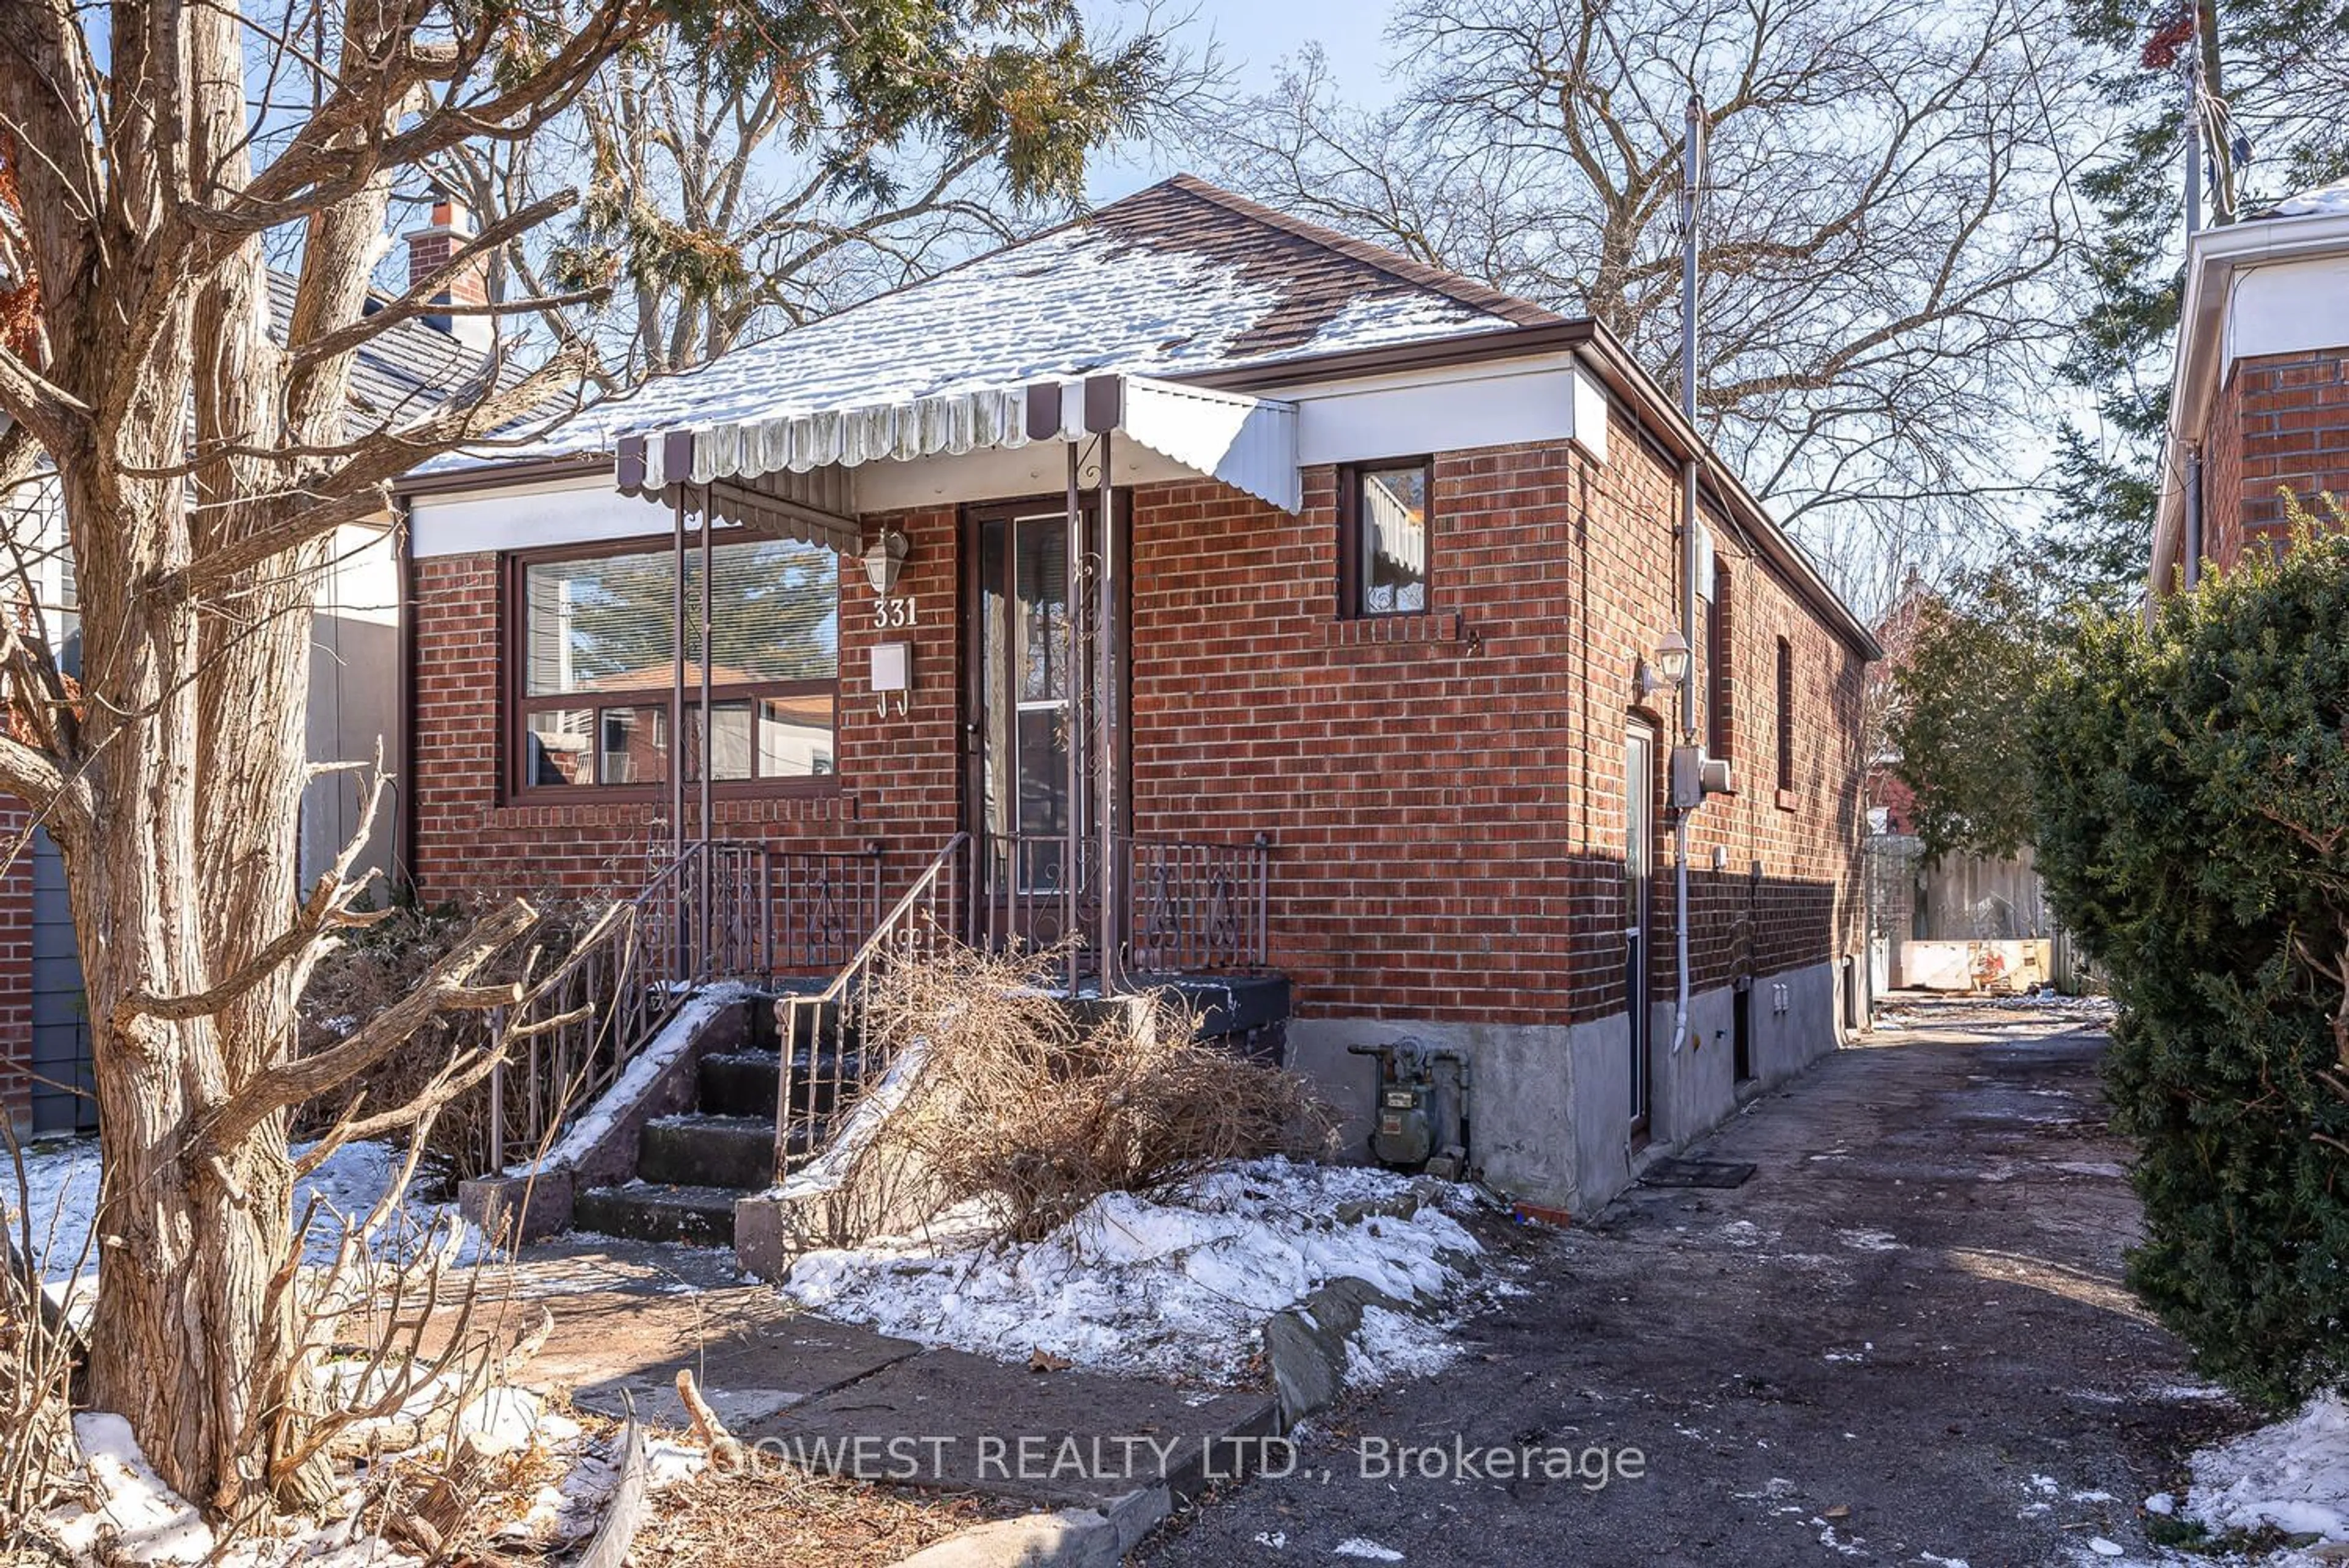 Home with brick exterior material for 331 Lumsden Ave, Toronto Ontario M4C 2L2